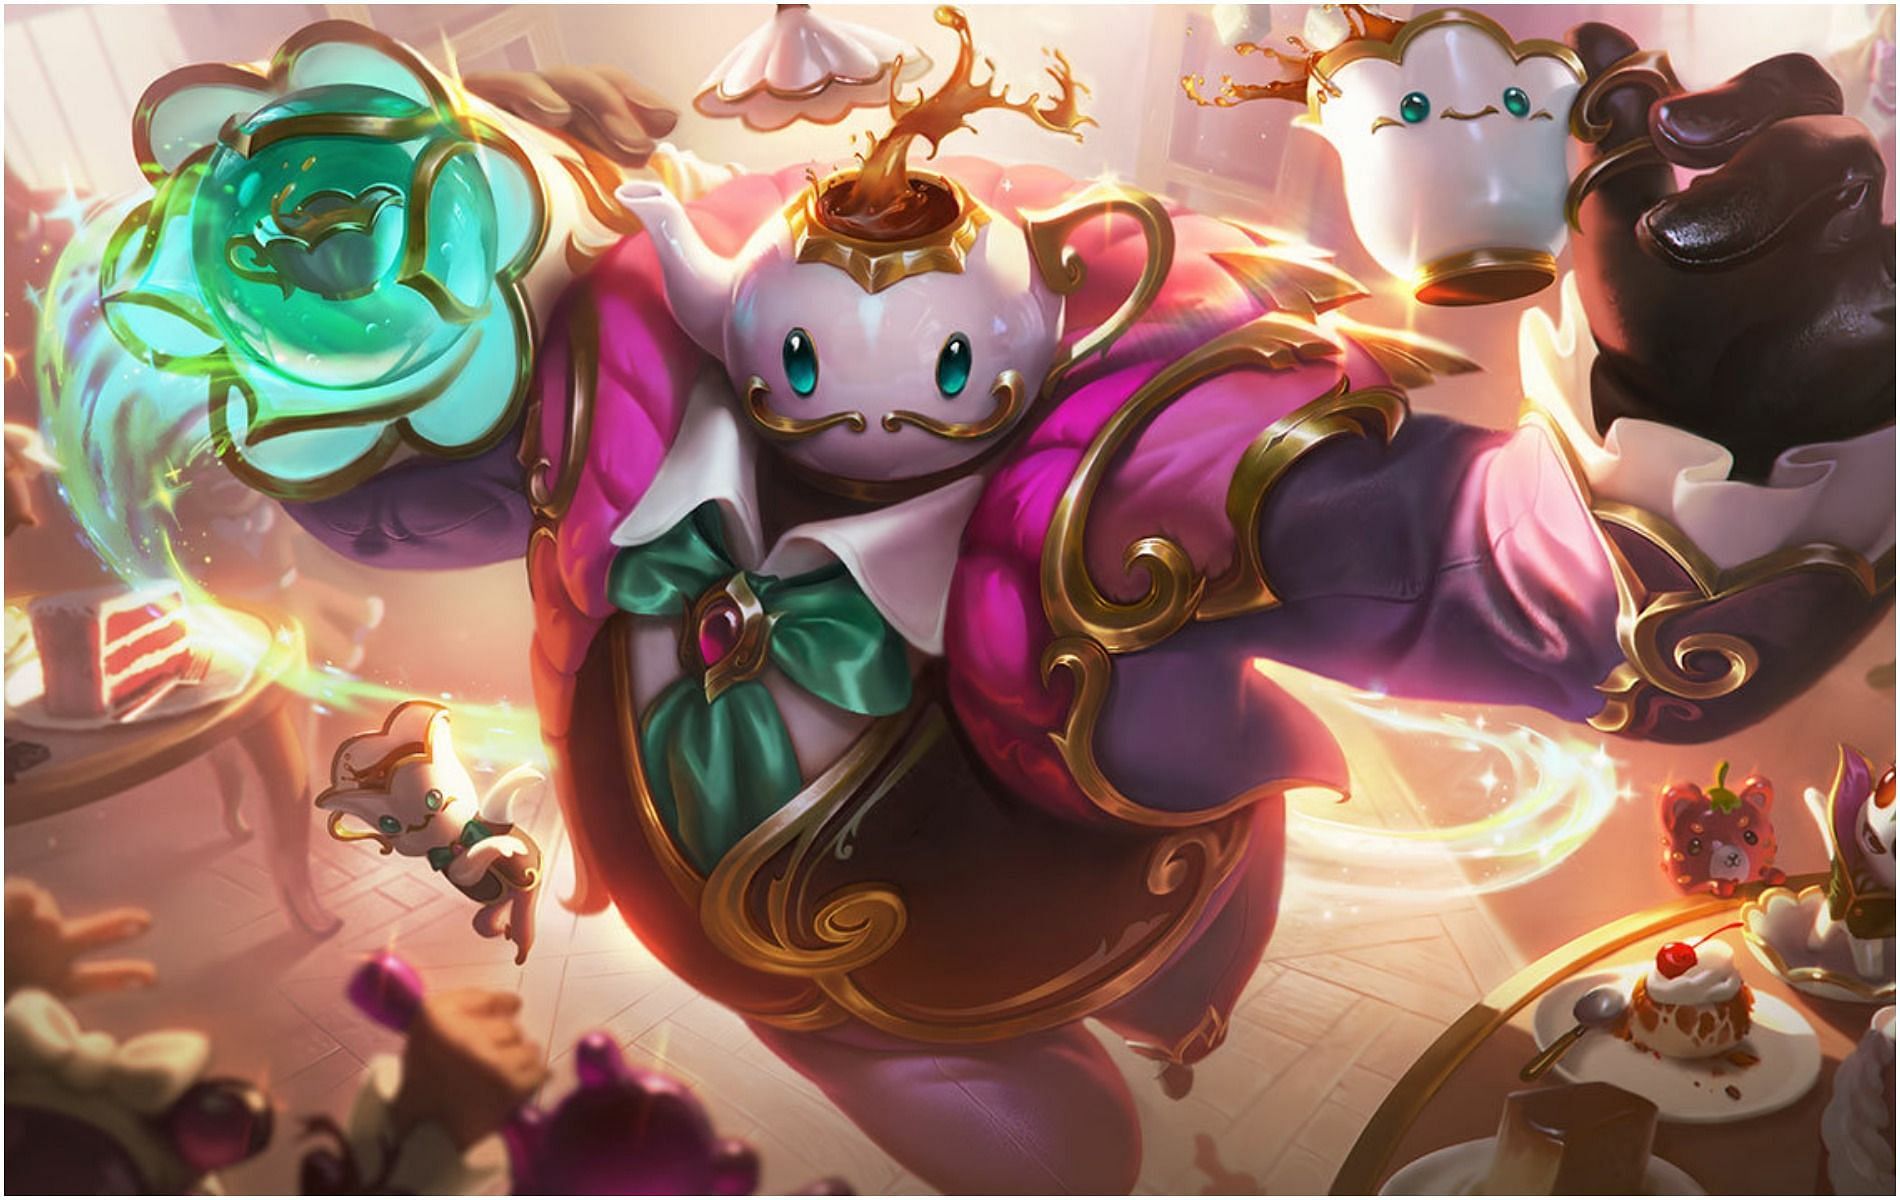 Bards Meeps can tank tower shots forever in League of Legends preseason 12 (Image via Riot Games)